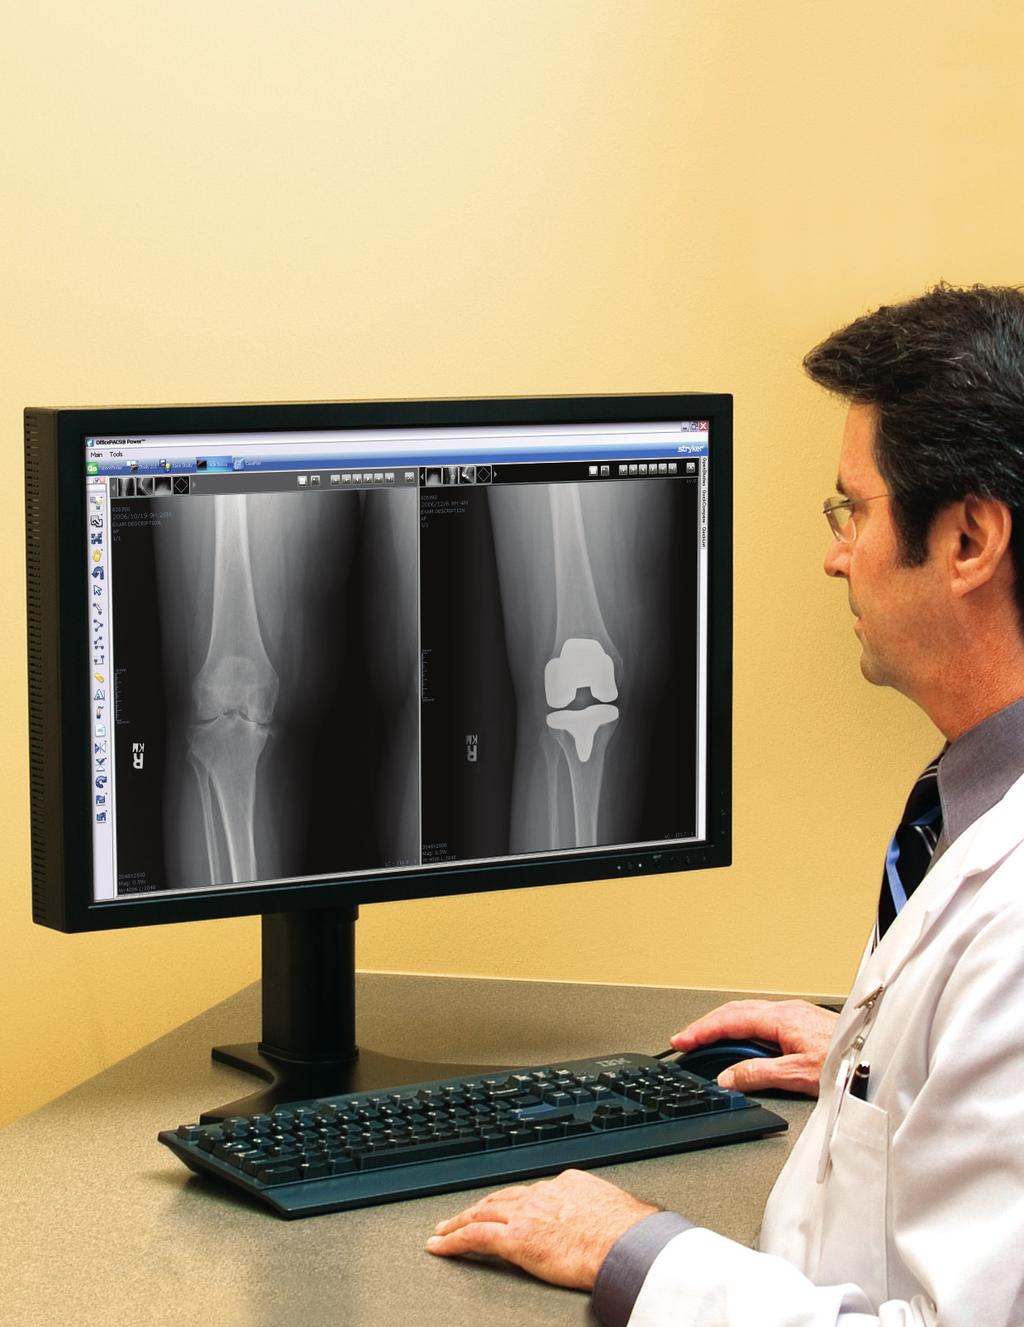 Our Focus is Orthopaedics Our solutions have a single goal to make life easier for orthopaedic surgeons.